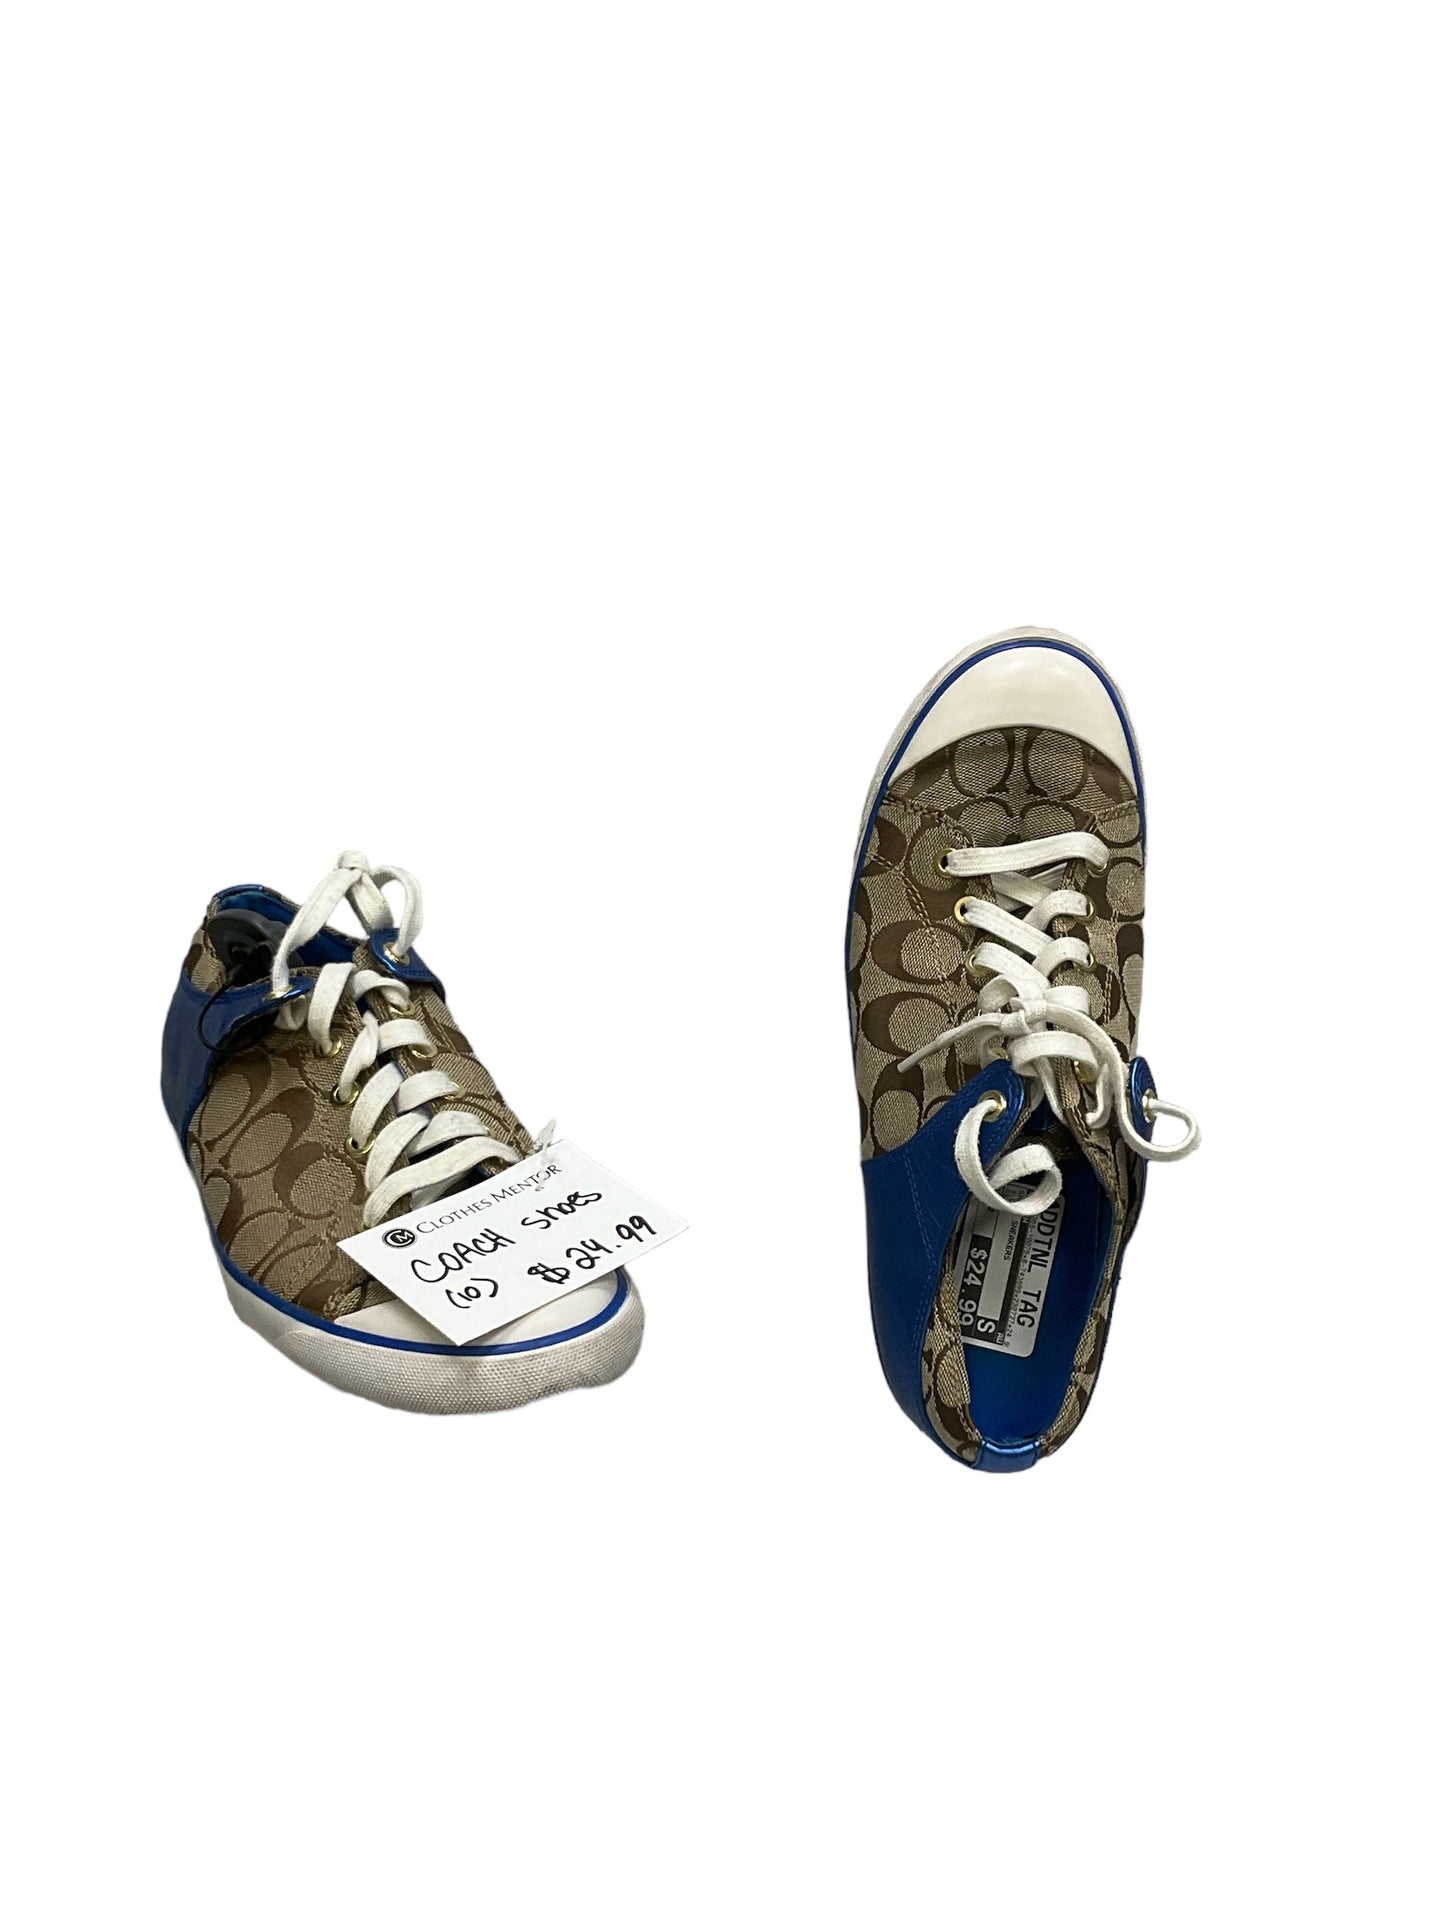 Shoes Sneakers By Coach  Size: 10